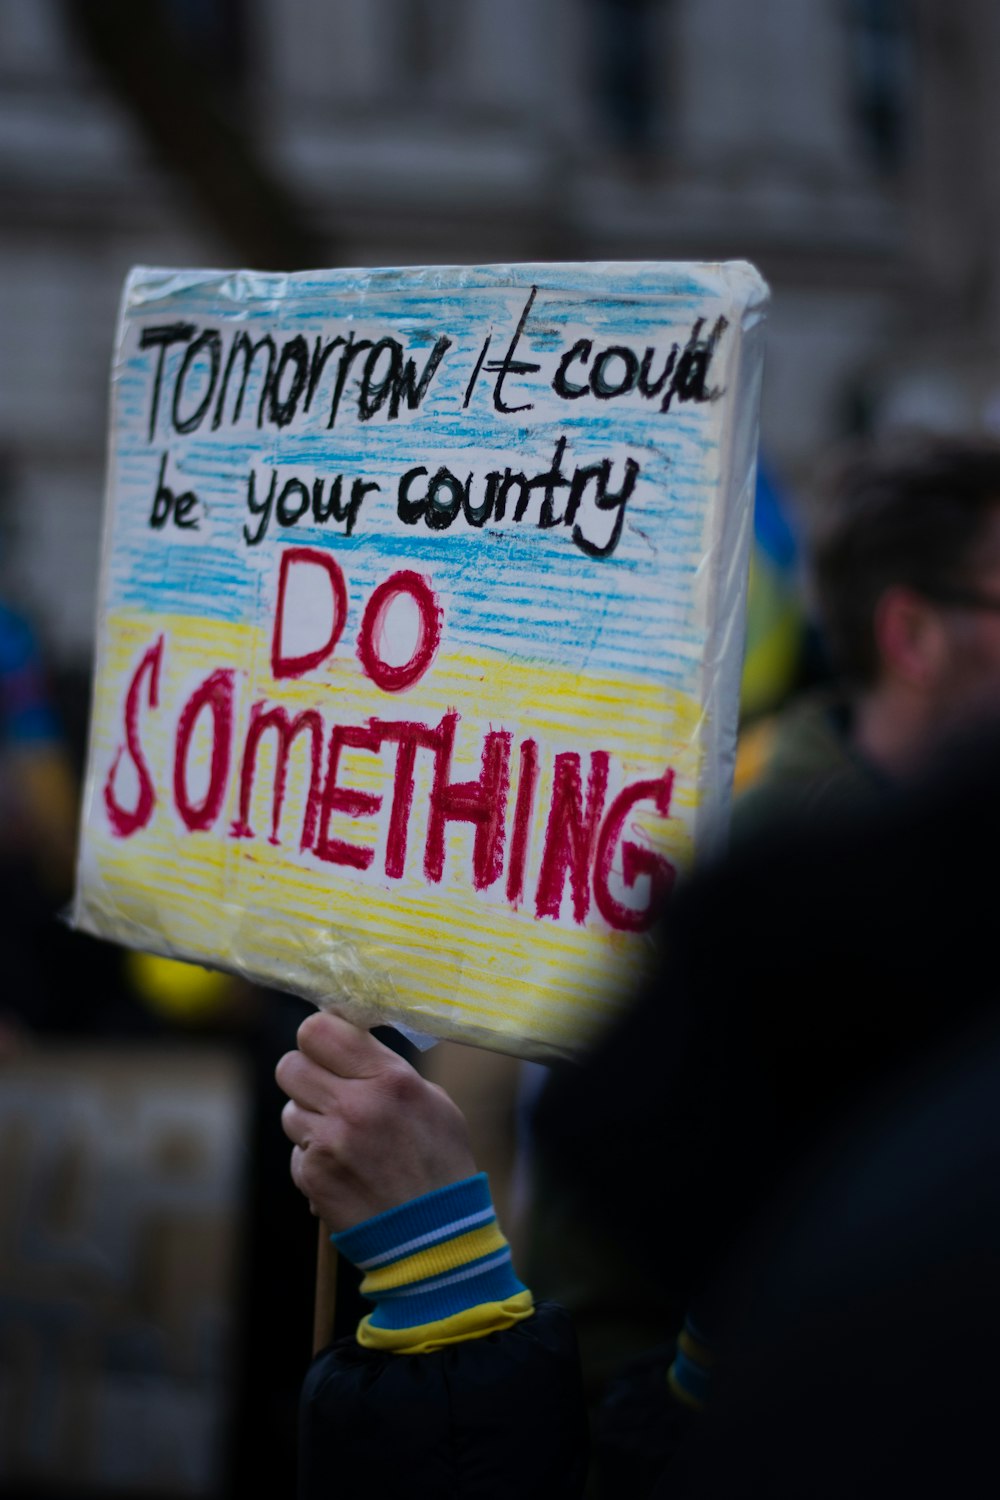 a person holding a sign that says tomorrow he could be your country do something